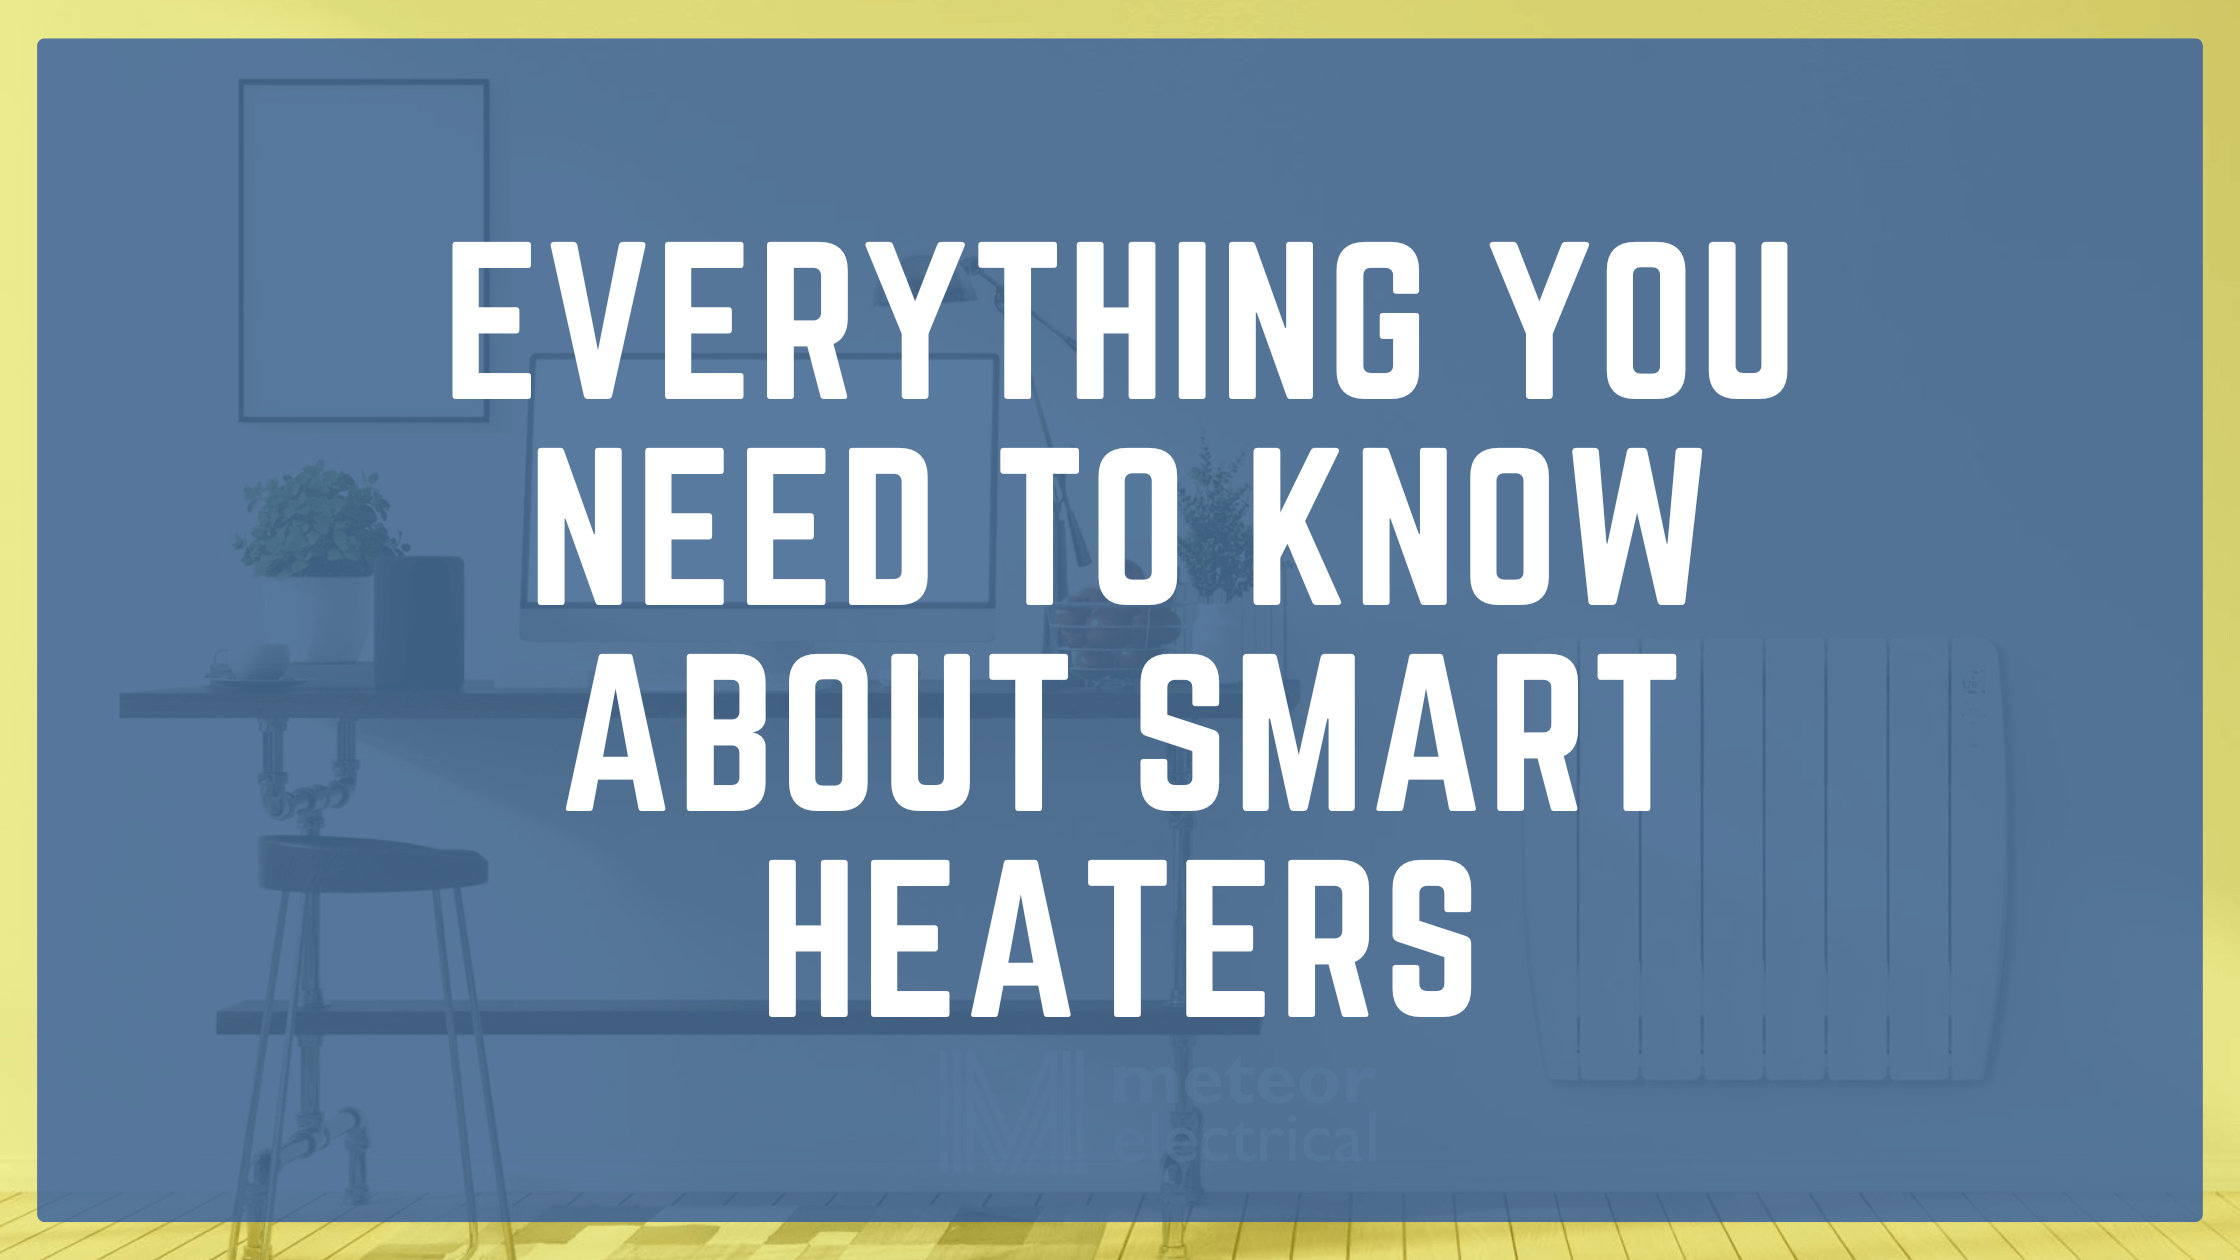 Everything You Need to Know About Smart Heaters